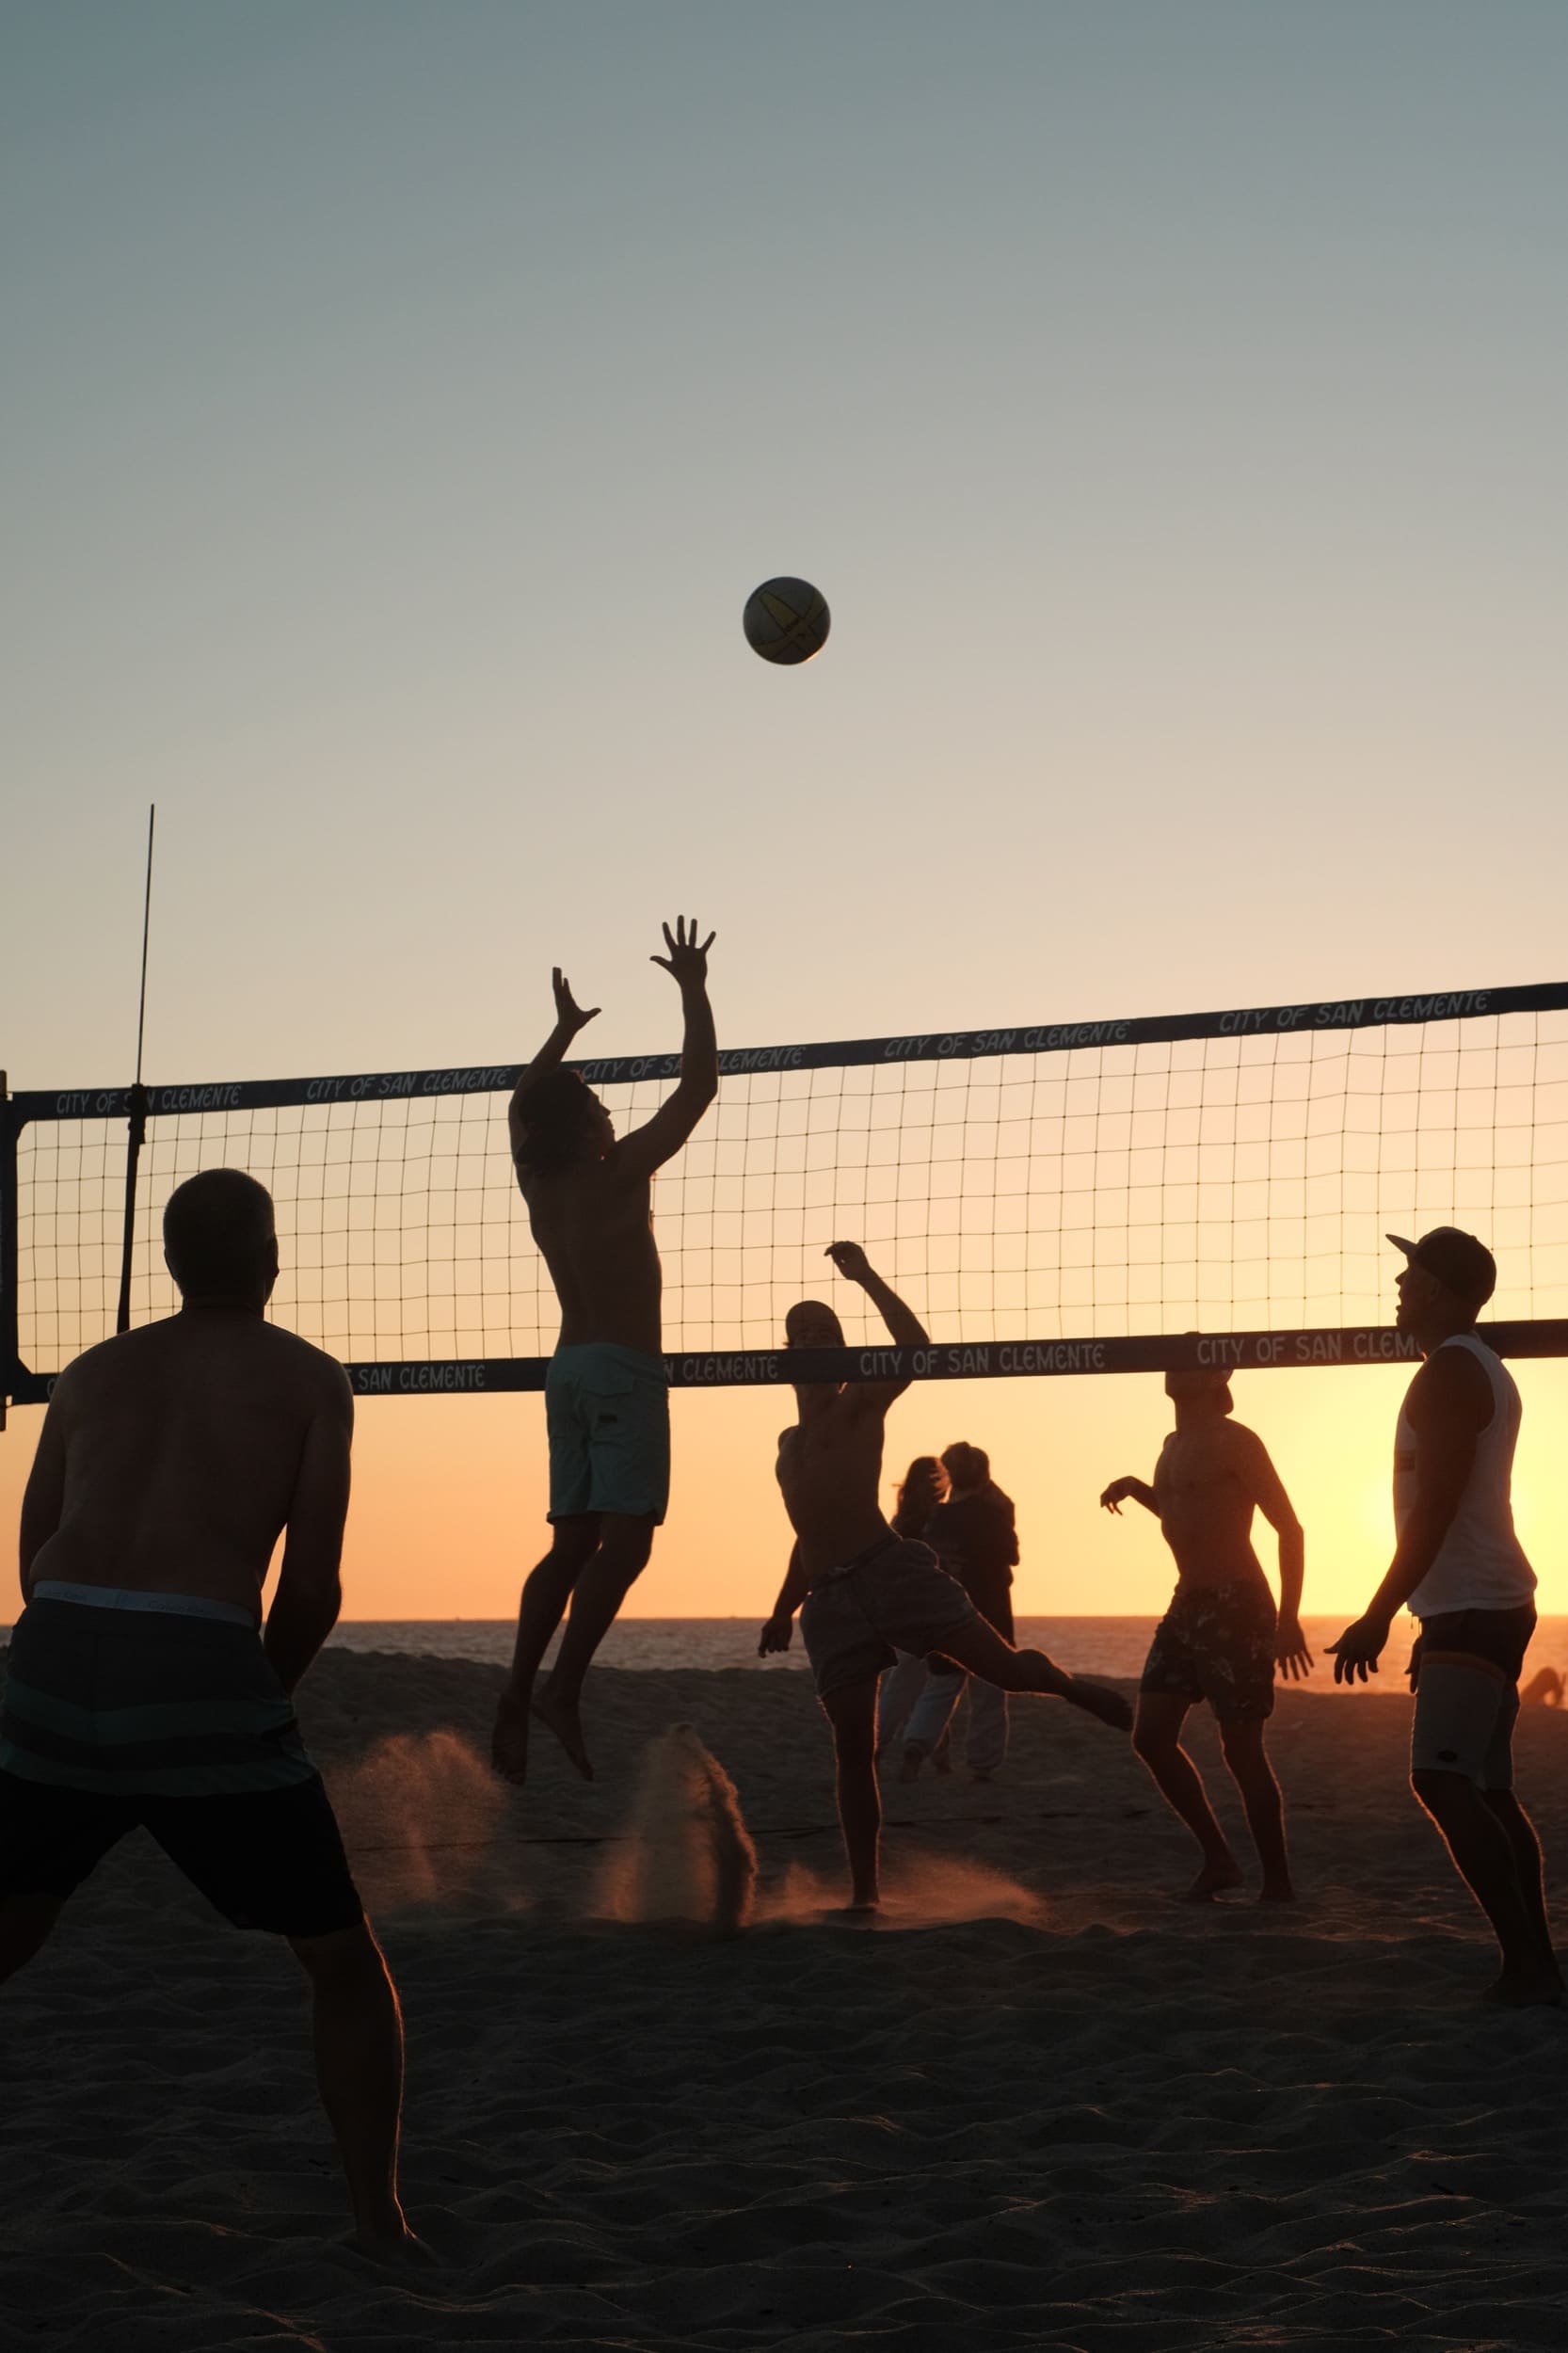 Sports photography, dudes playing volleyball.